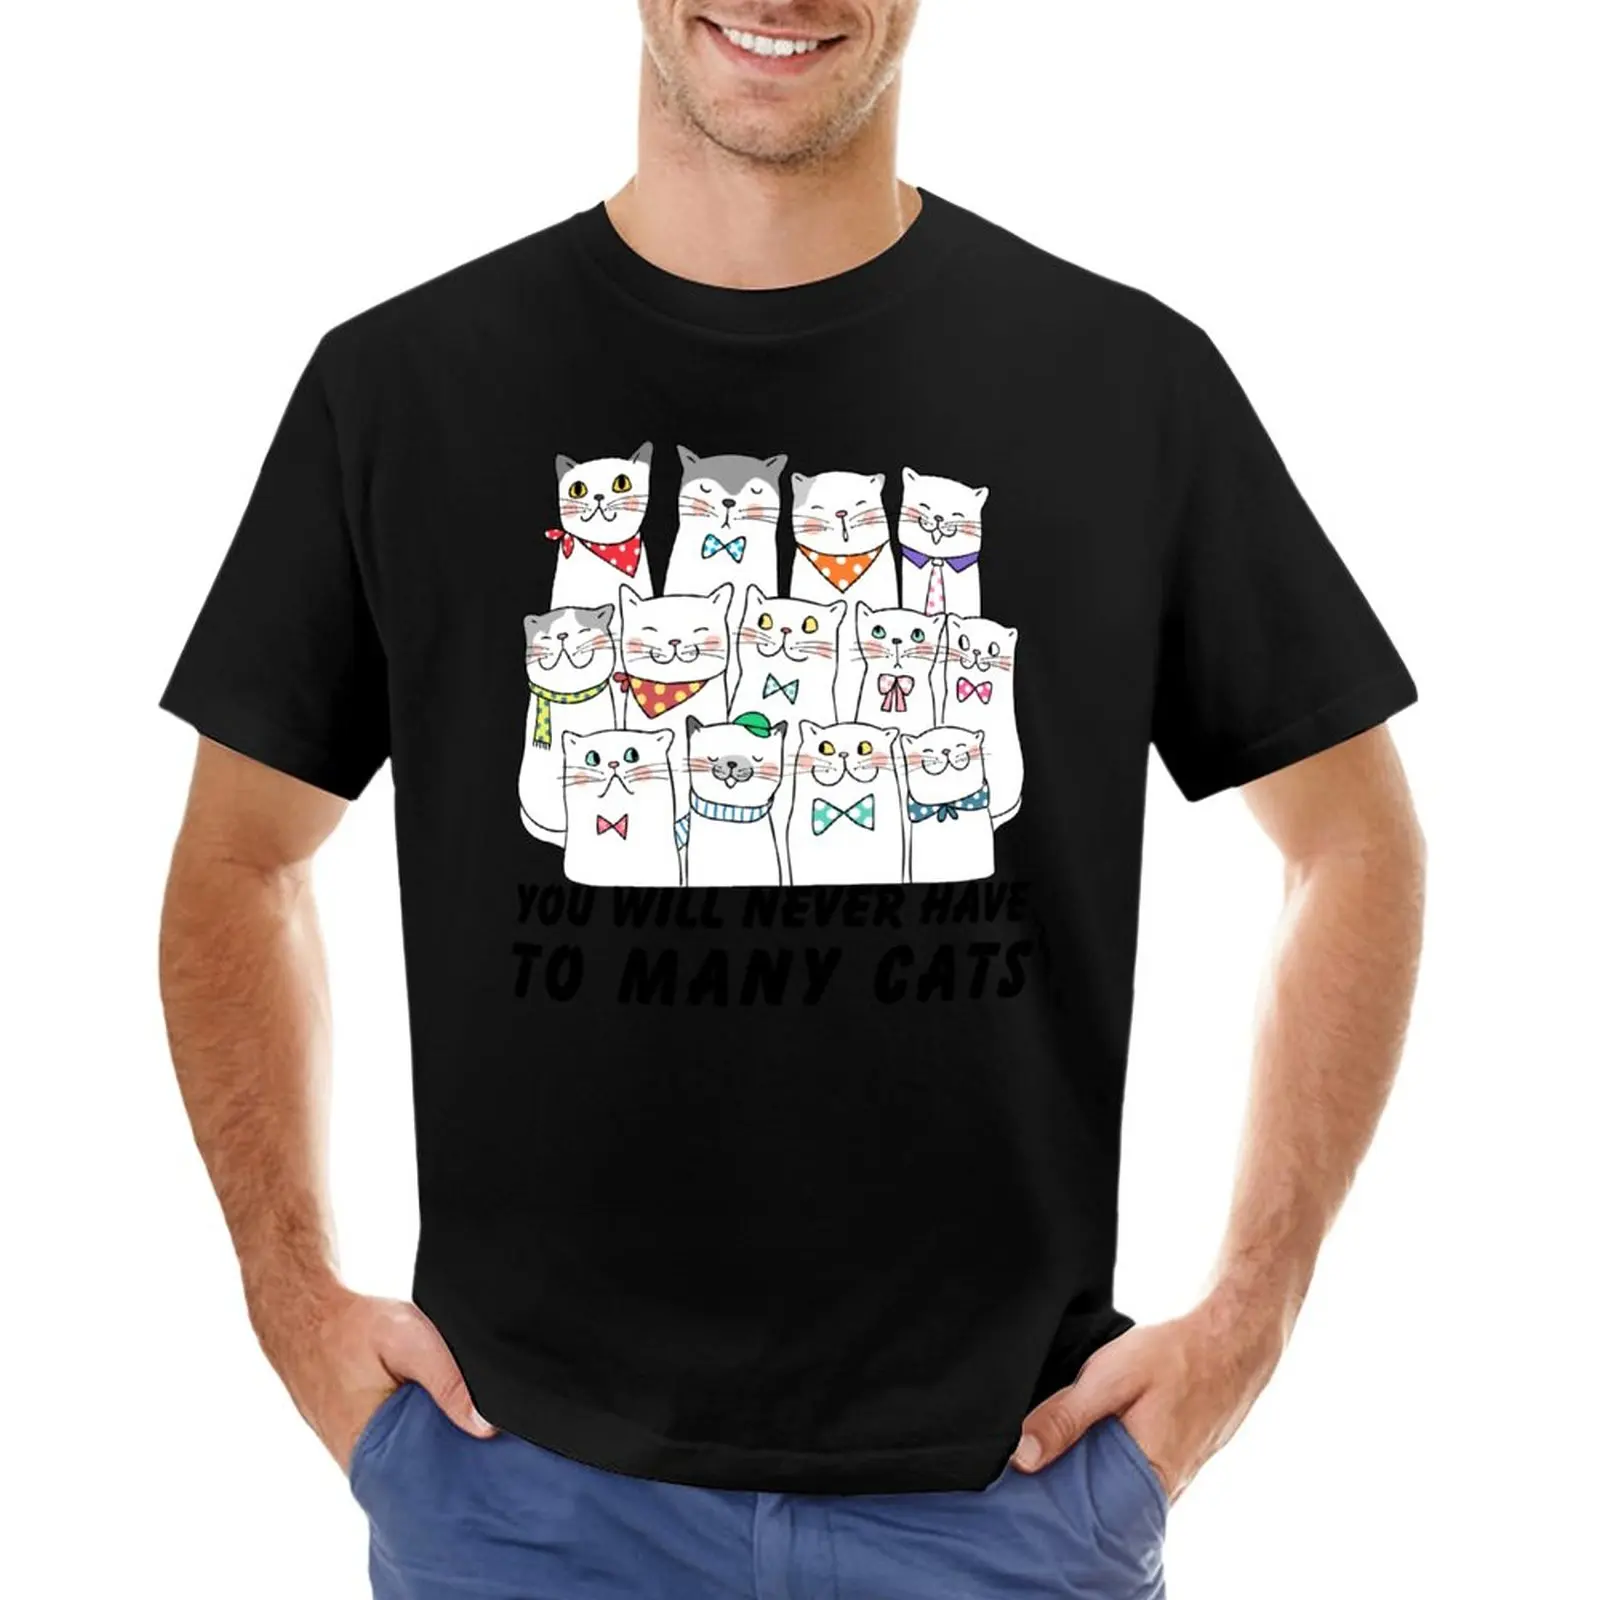 

You Can Never Have Too Many Cats | A Multi-Cat Design for Cat Lovers T-Shirt Short sleeve tee quick drying t-shirt mens t shirts